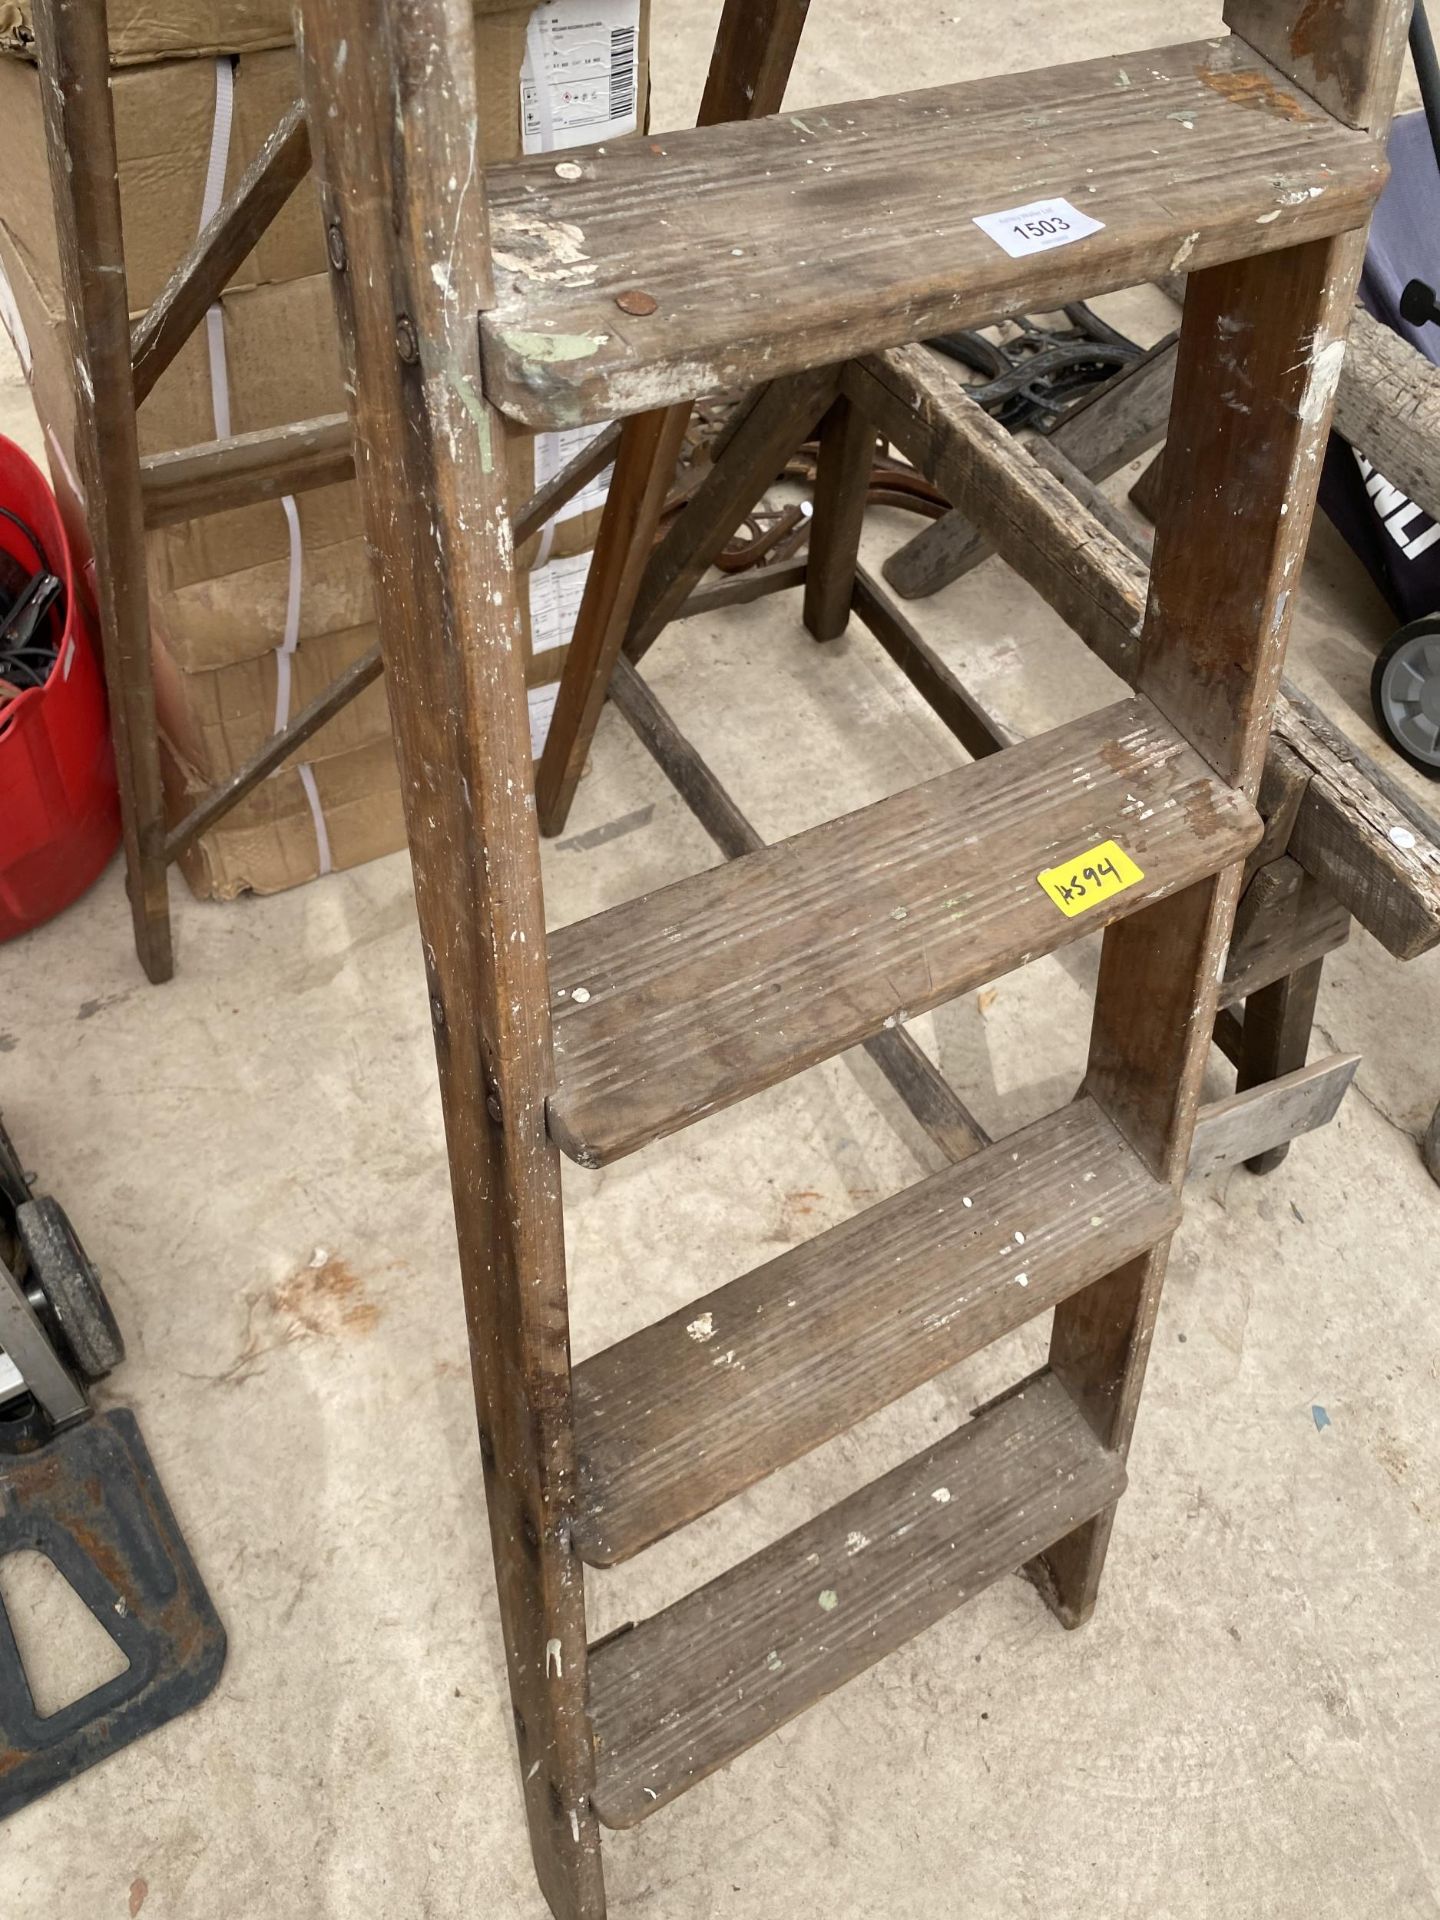 A VINTAGE WOODEN FOUR RUNG STEP LADDER - Image 3 of 4